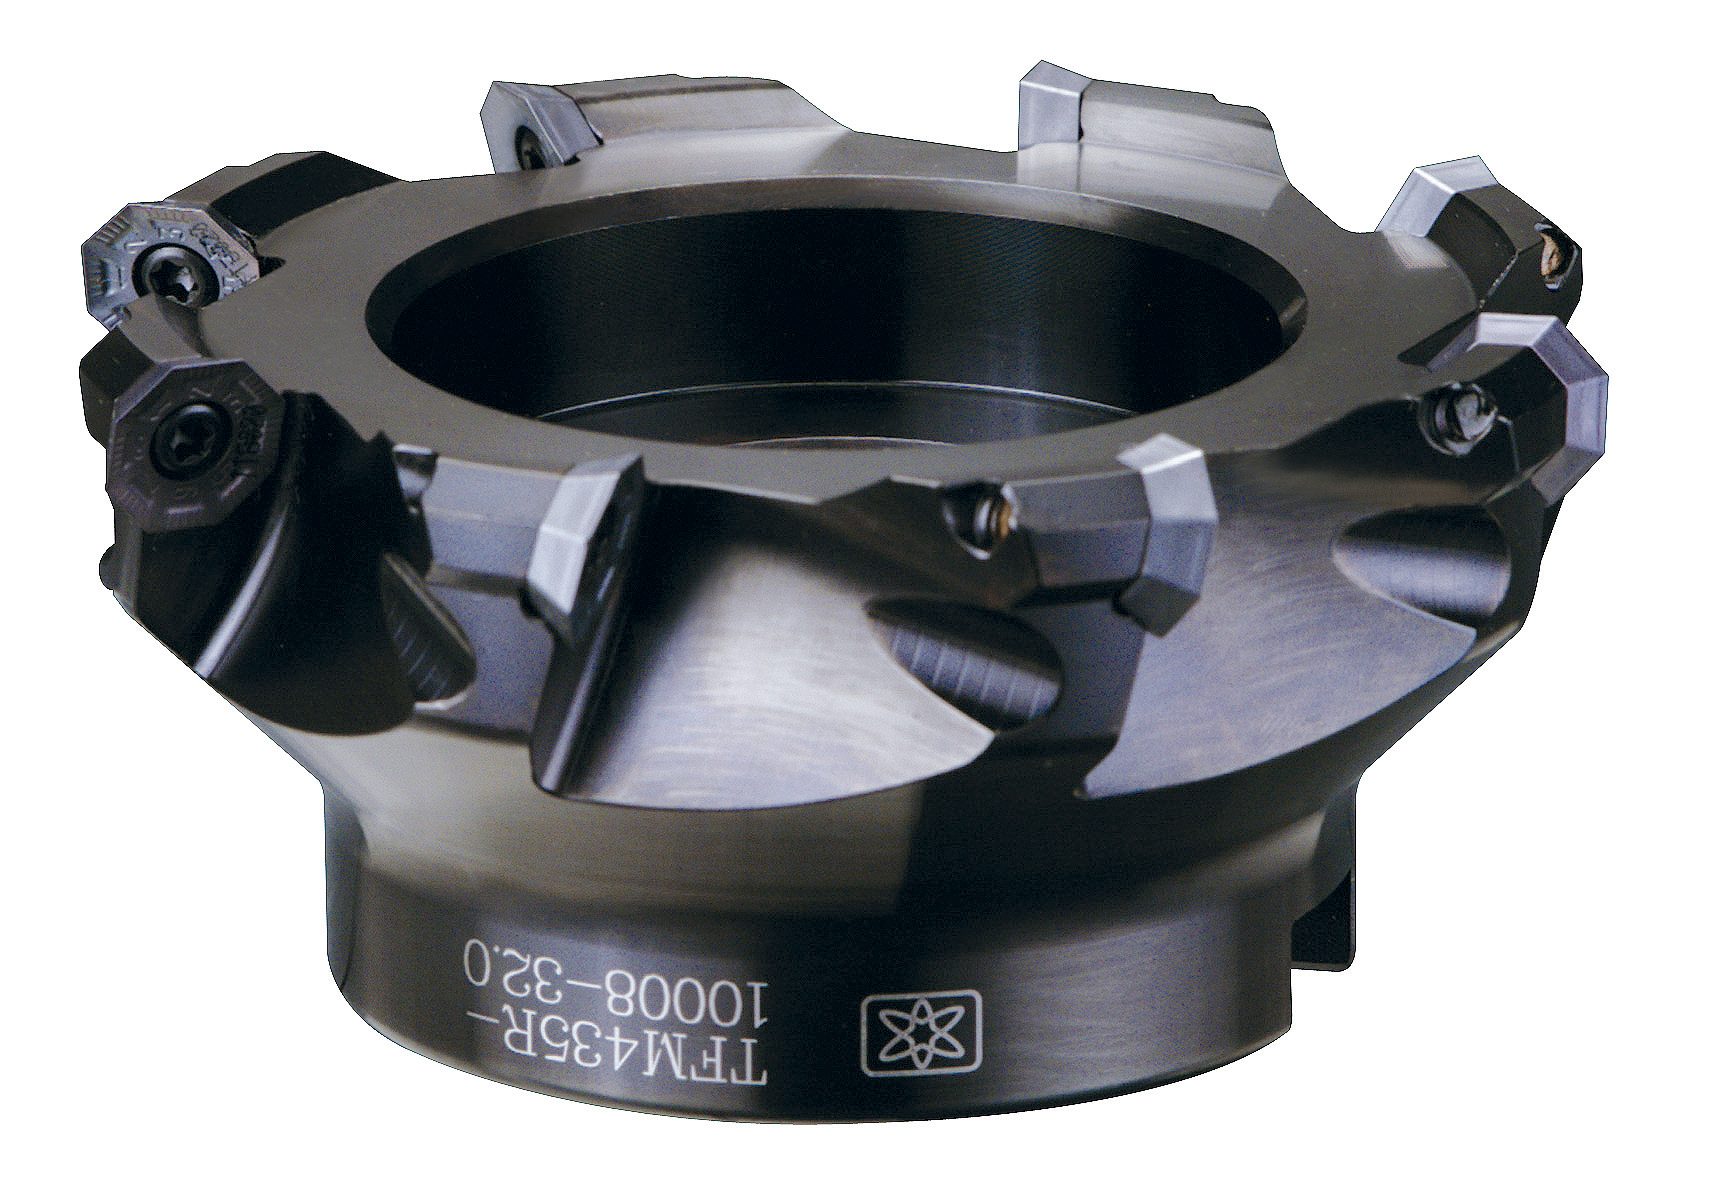 Products|TFM435 (OFMT15T3) 45° Face Milling